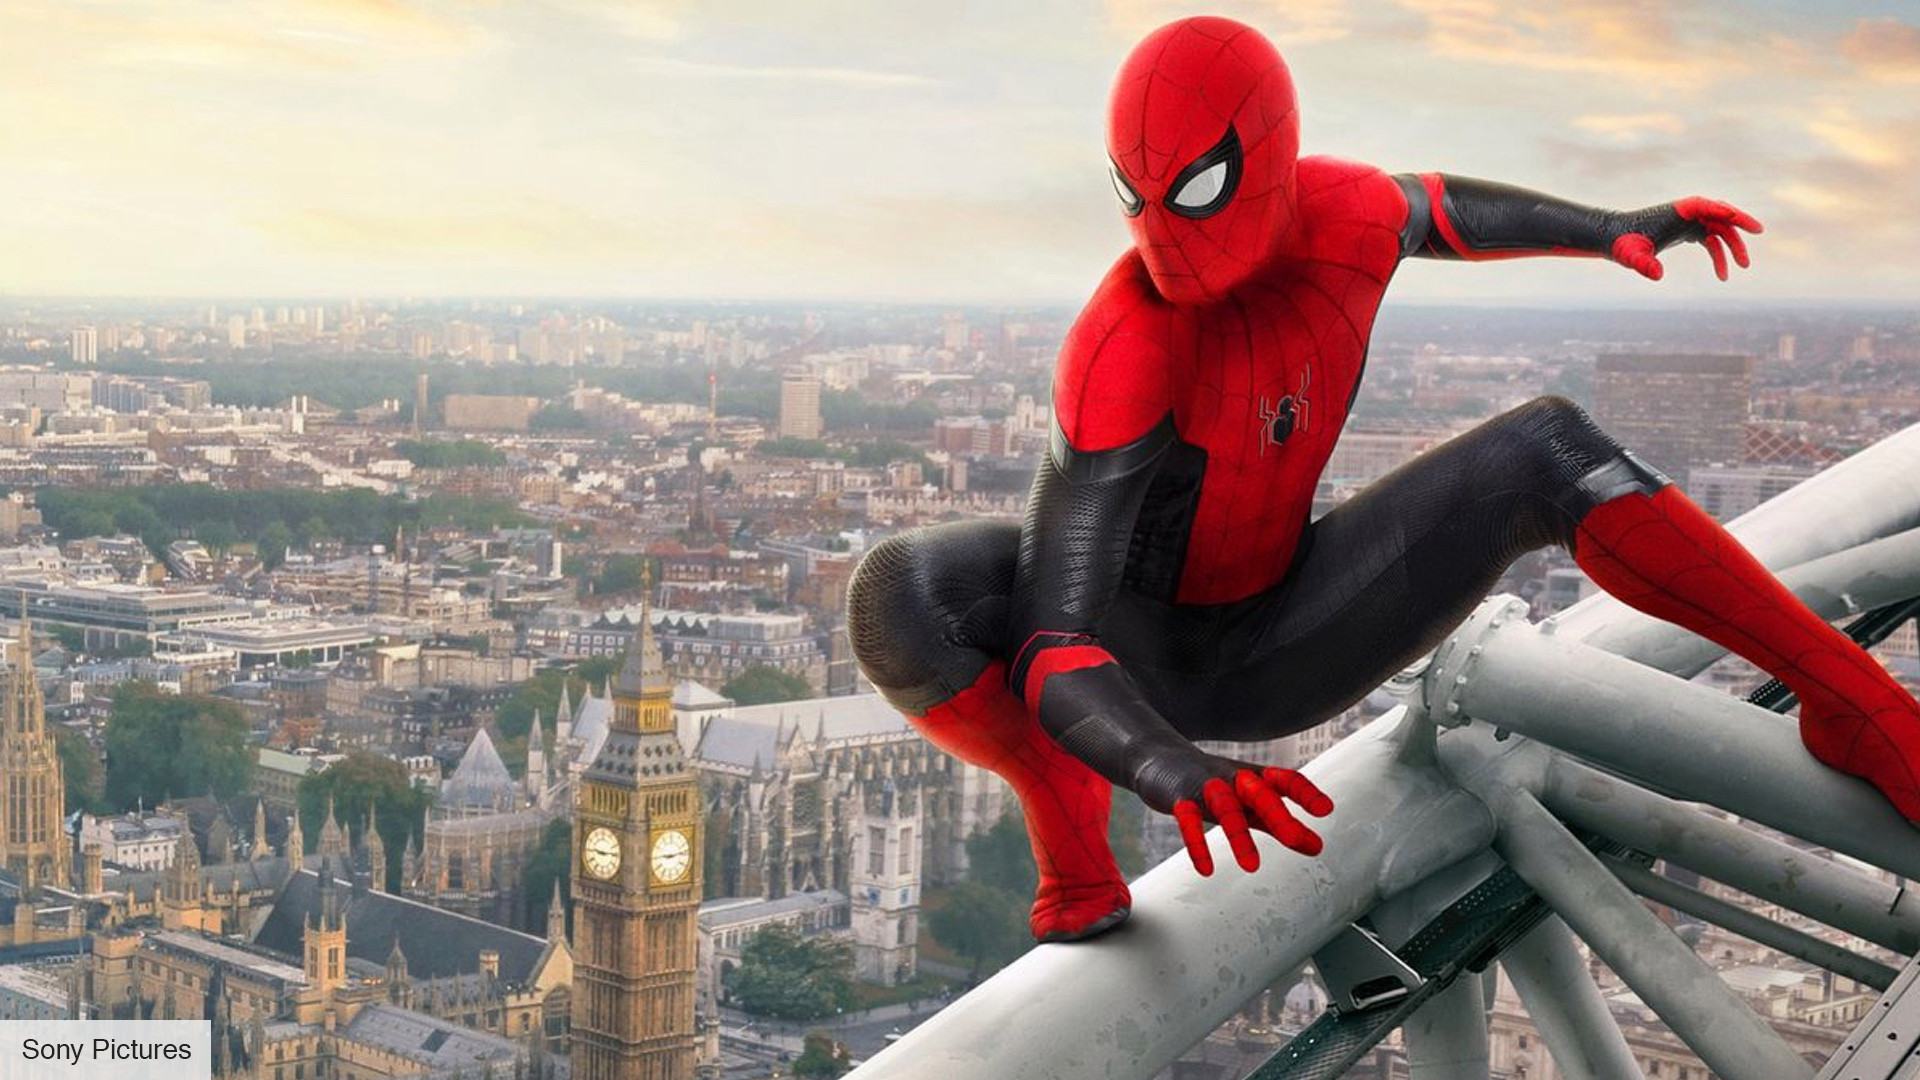 Spider-Man: No Way Home release date, trailer and everything else we